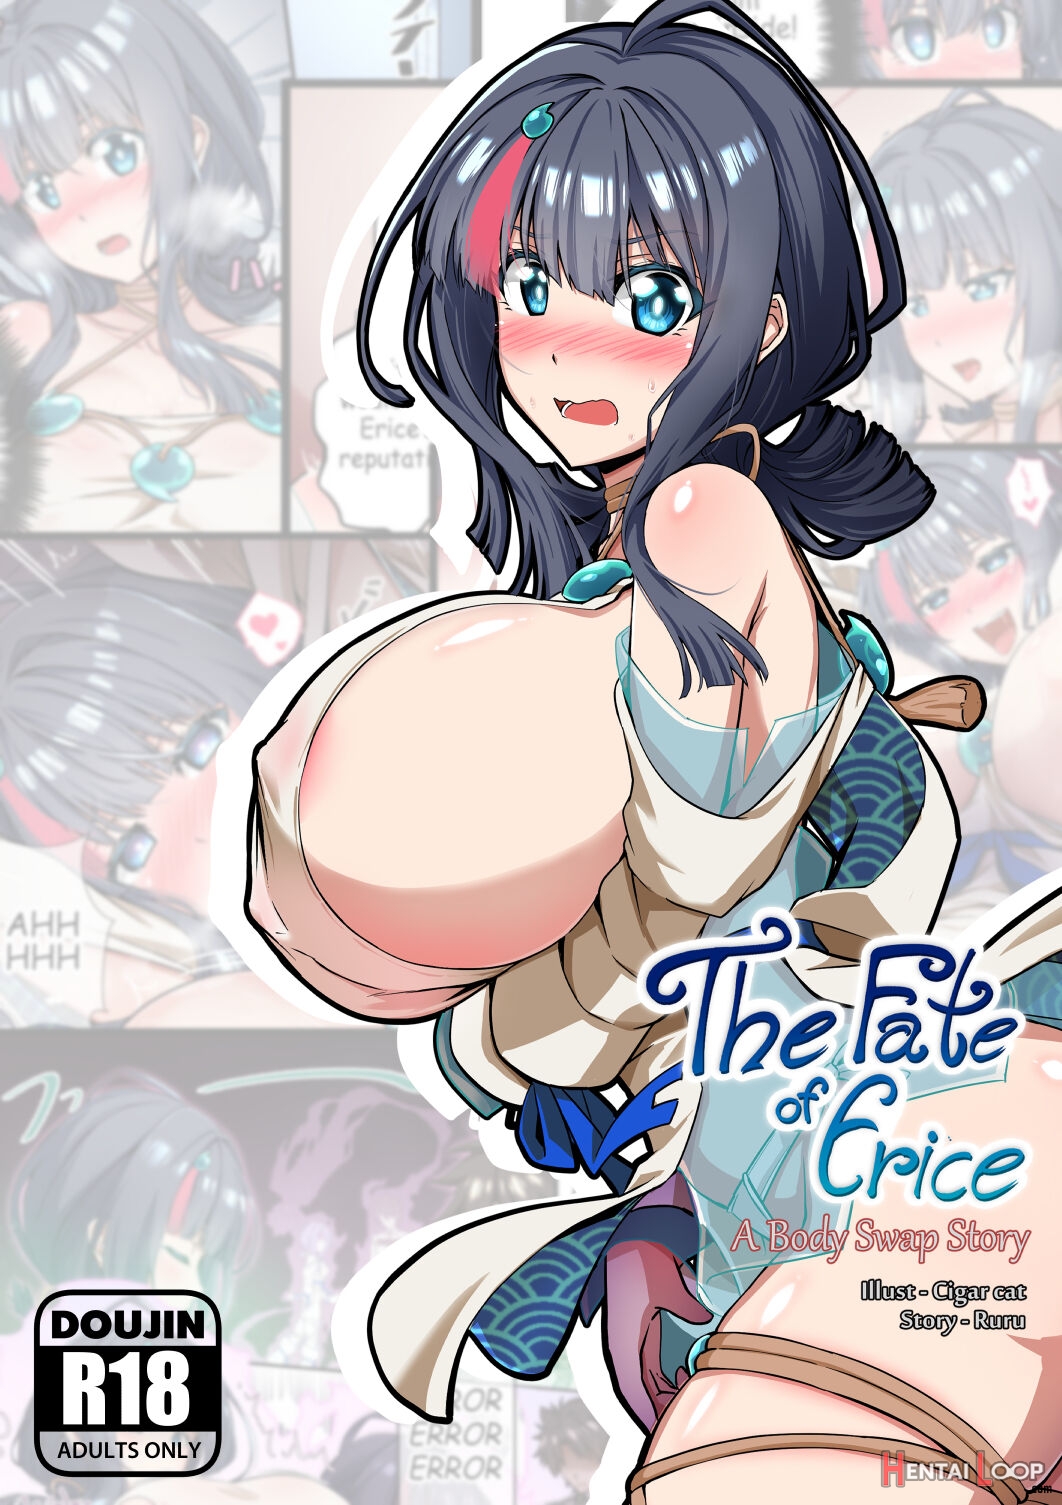 Read The Fate Of Erice -a Body Swap Story- (by Cigar Cat) - Hentai  doujinshi for free at HentaiLoop